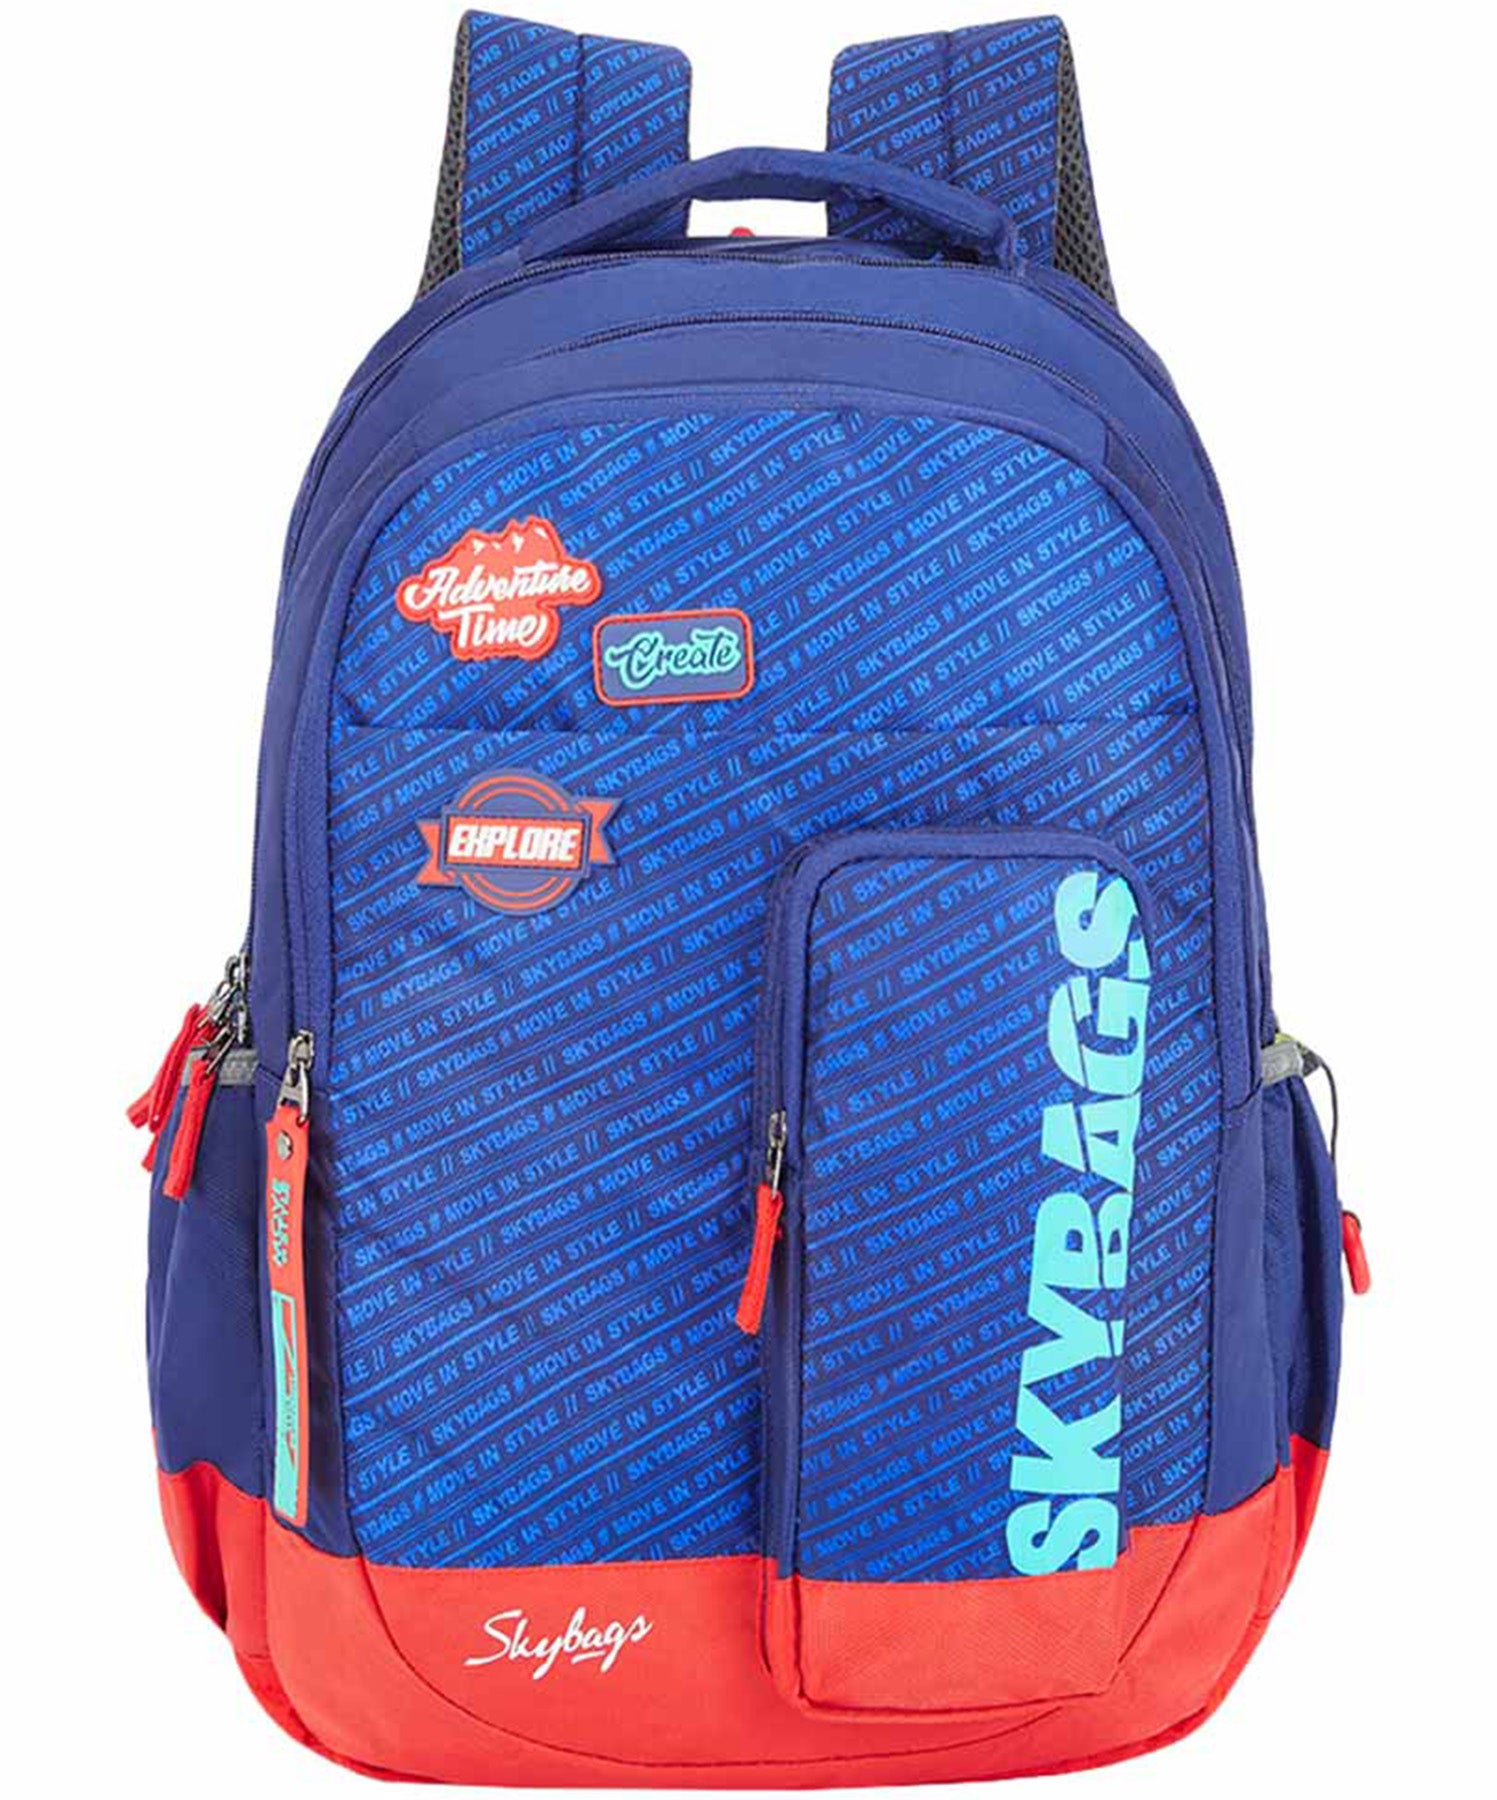 SKYBAGS, Unisex 35 L Backpack with Pencil Pocket, Blue, DRIPNXT01BE